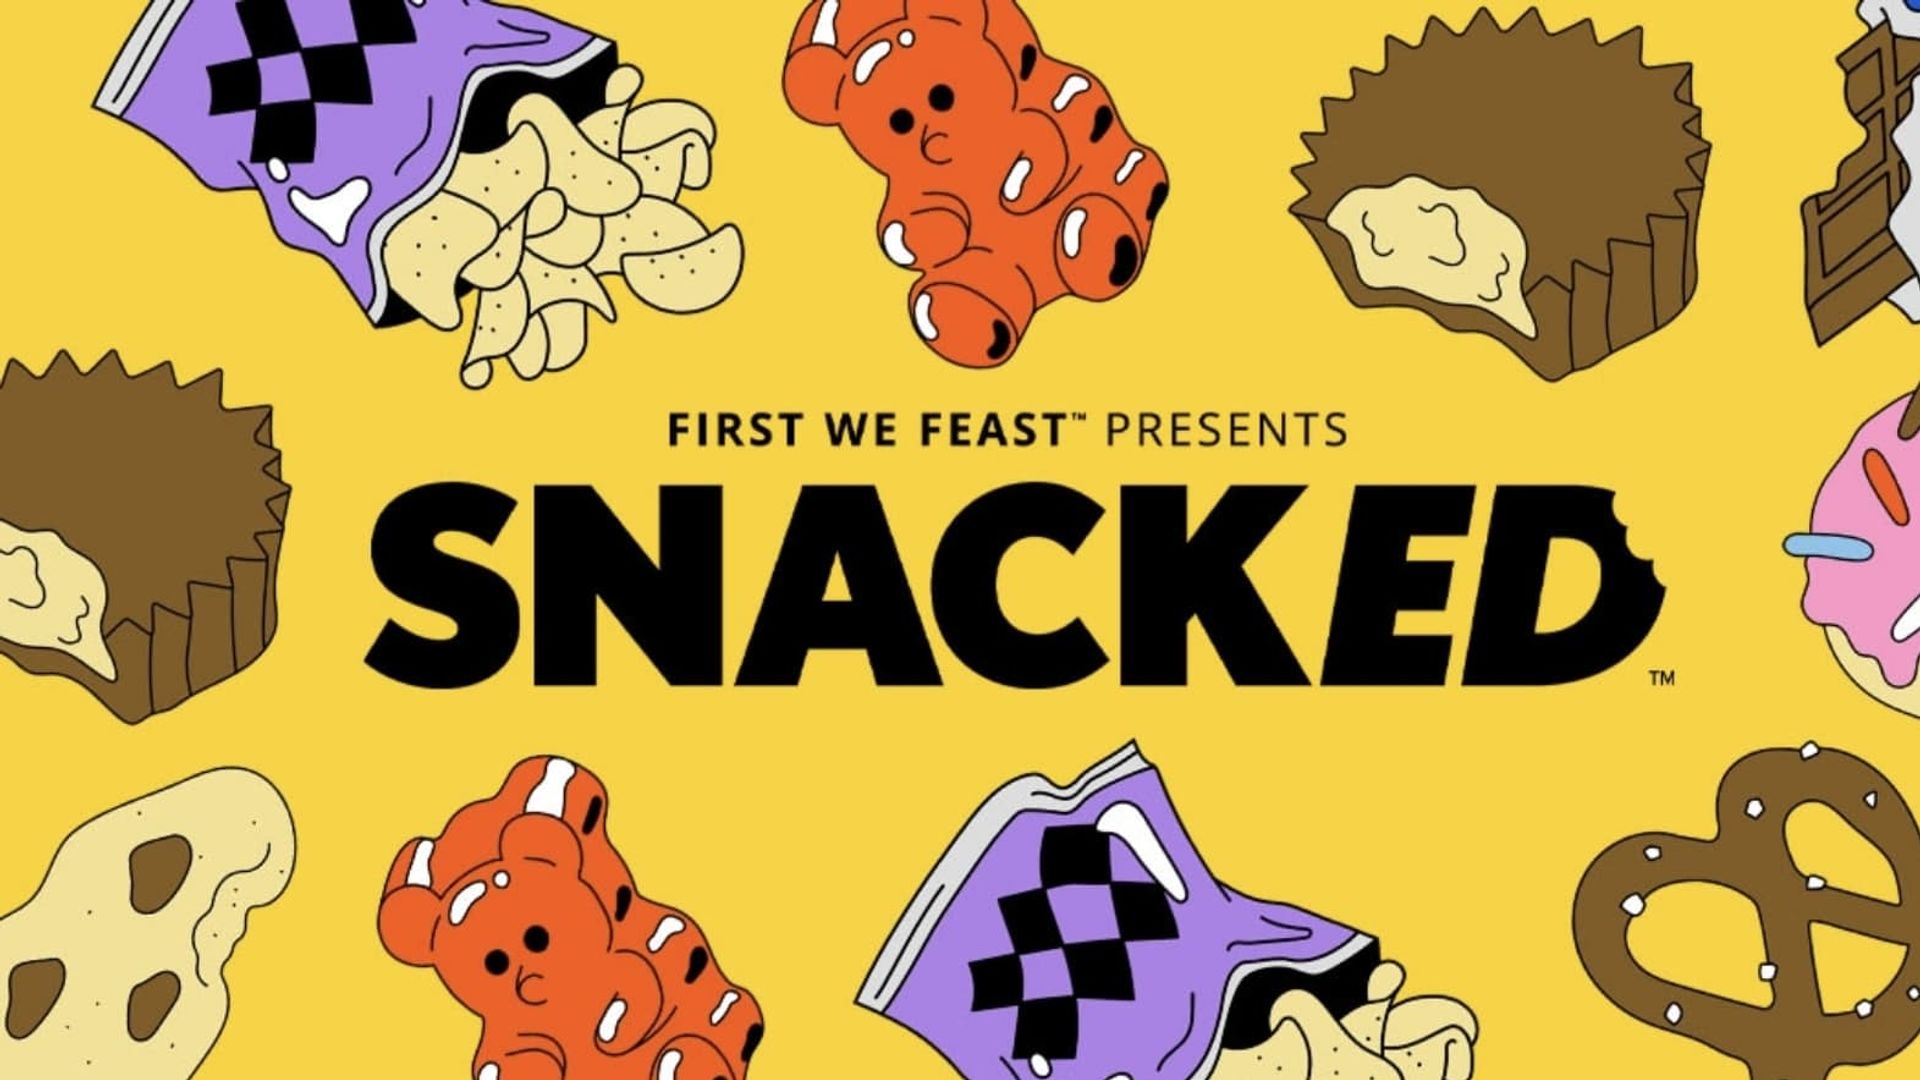 Snacked background